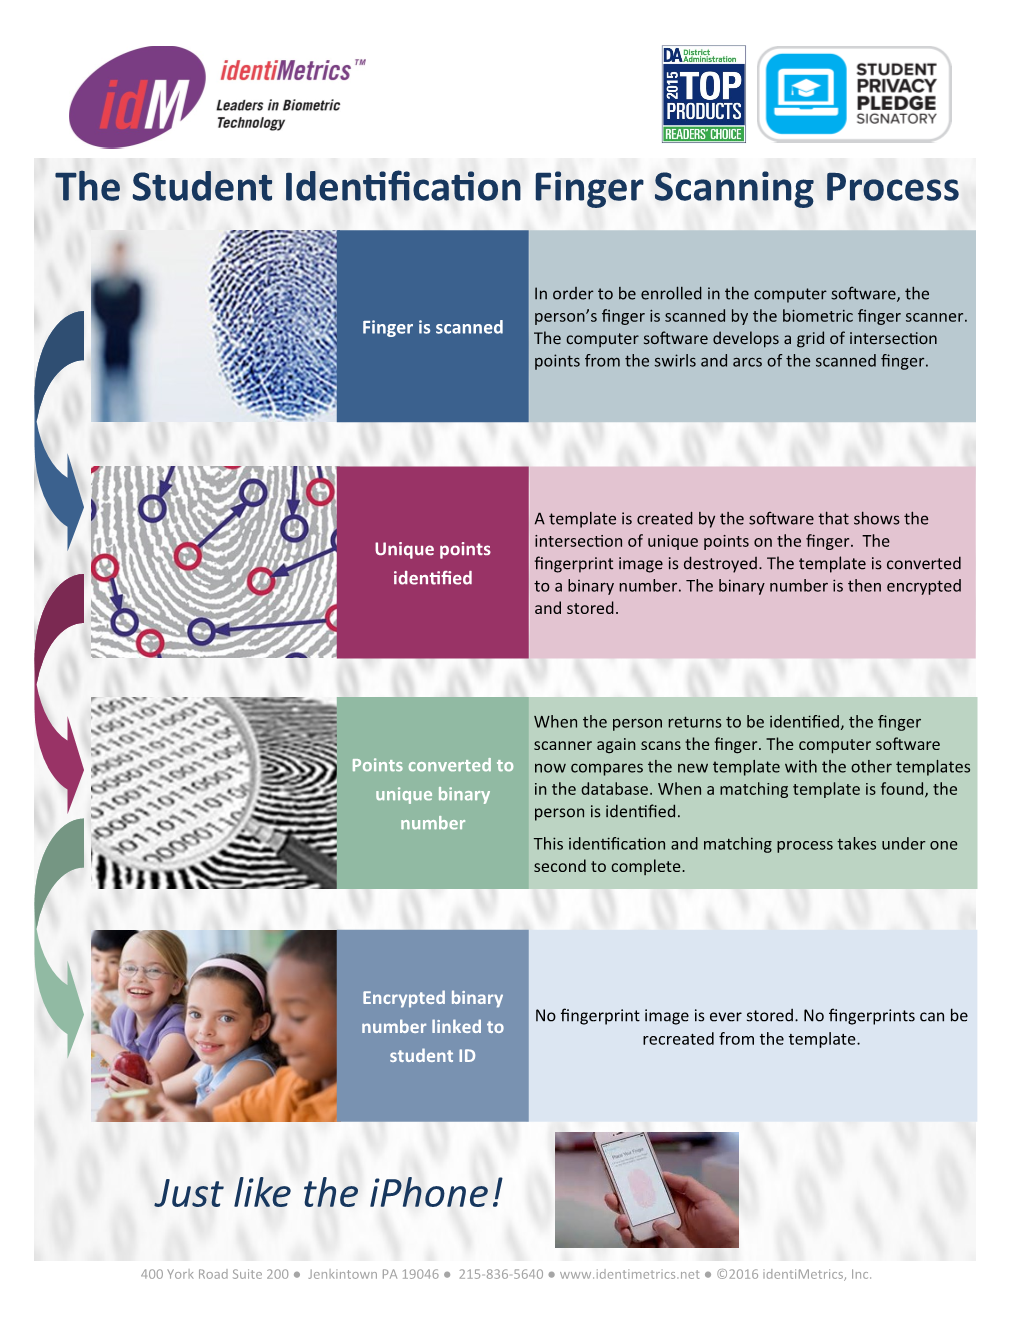 The Biometric Student Identification Finger Scanning Process